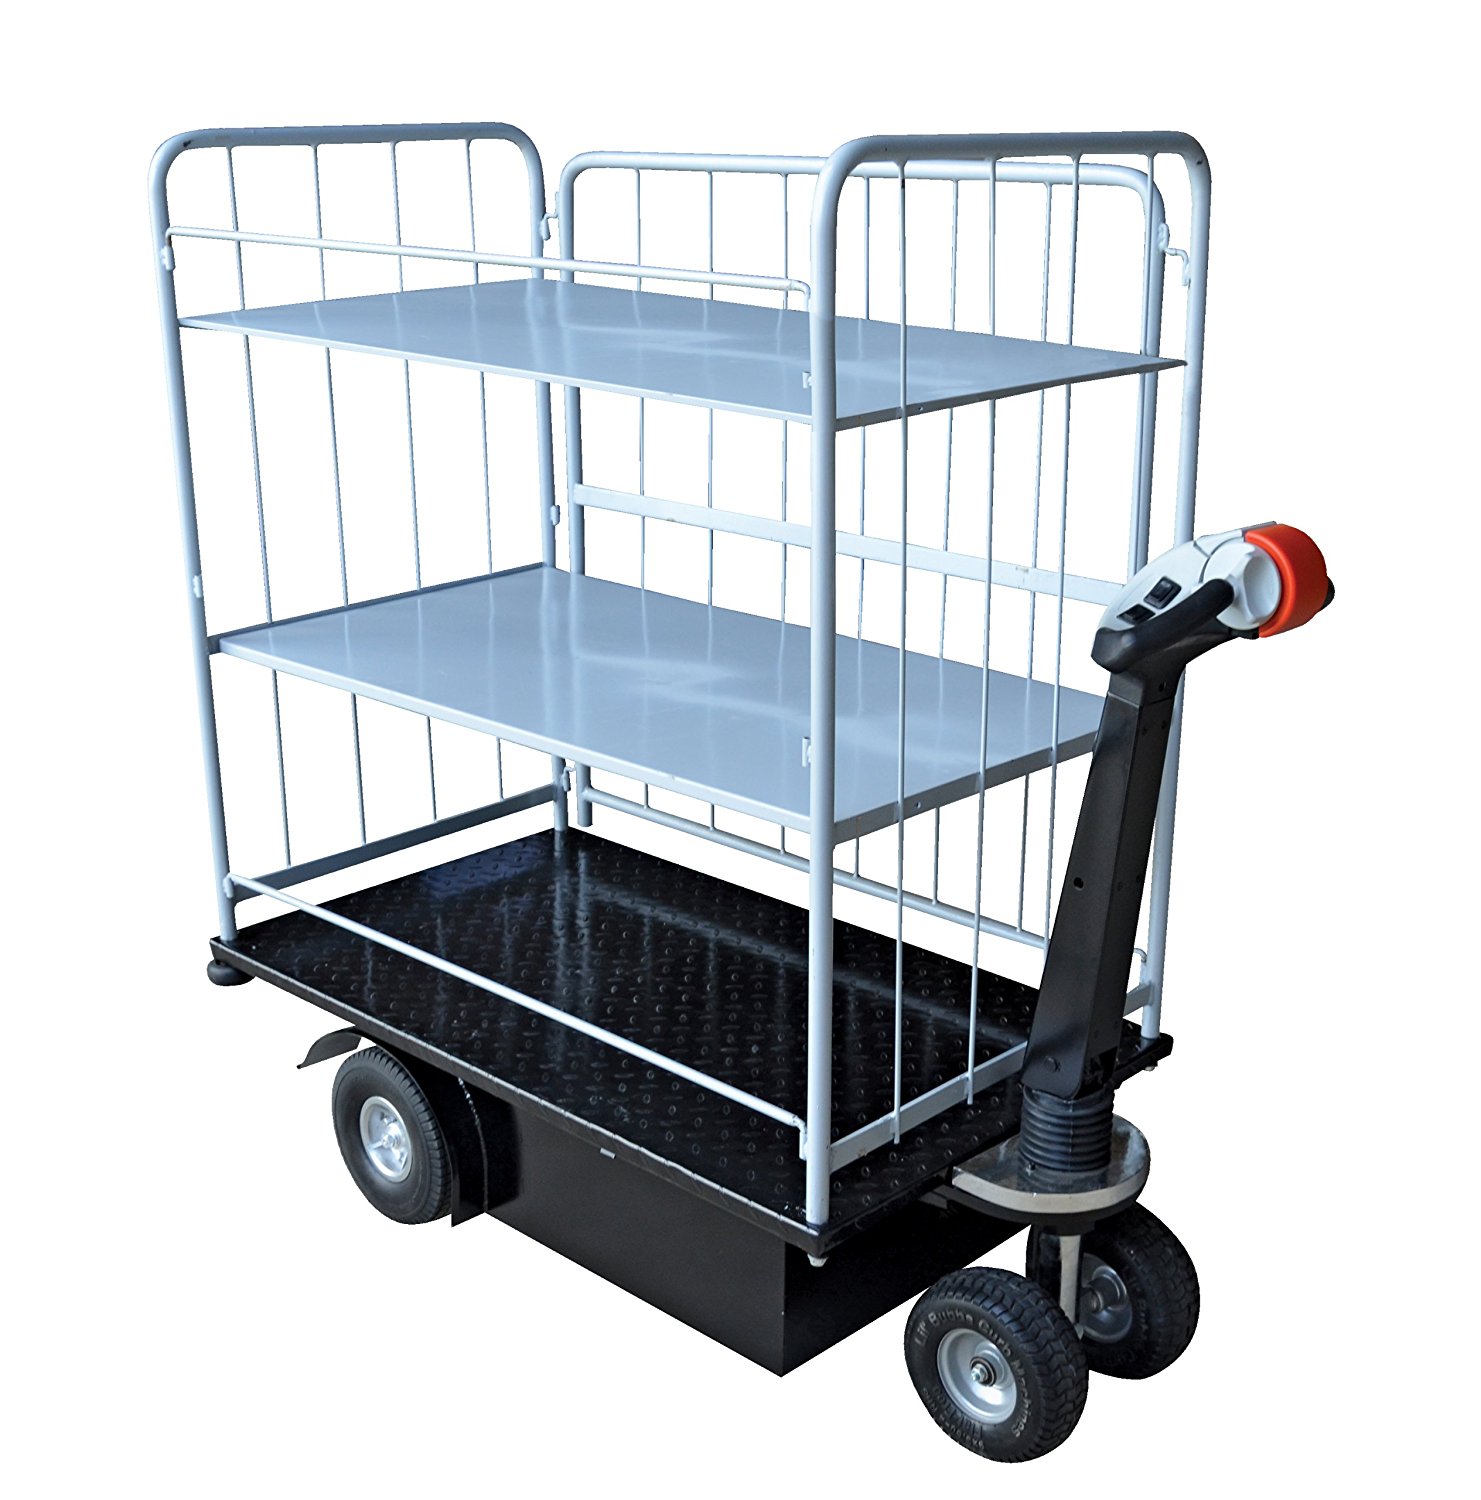 Picture of a cart truck.